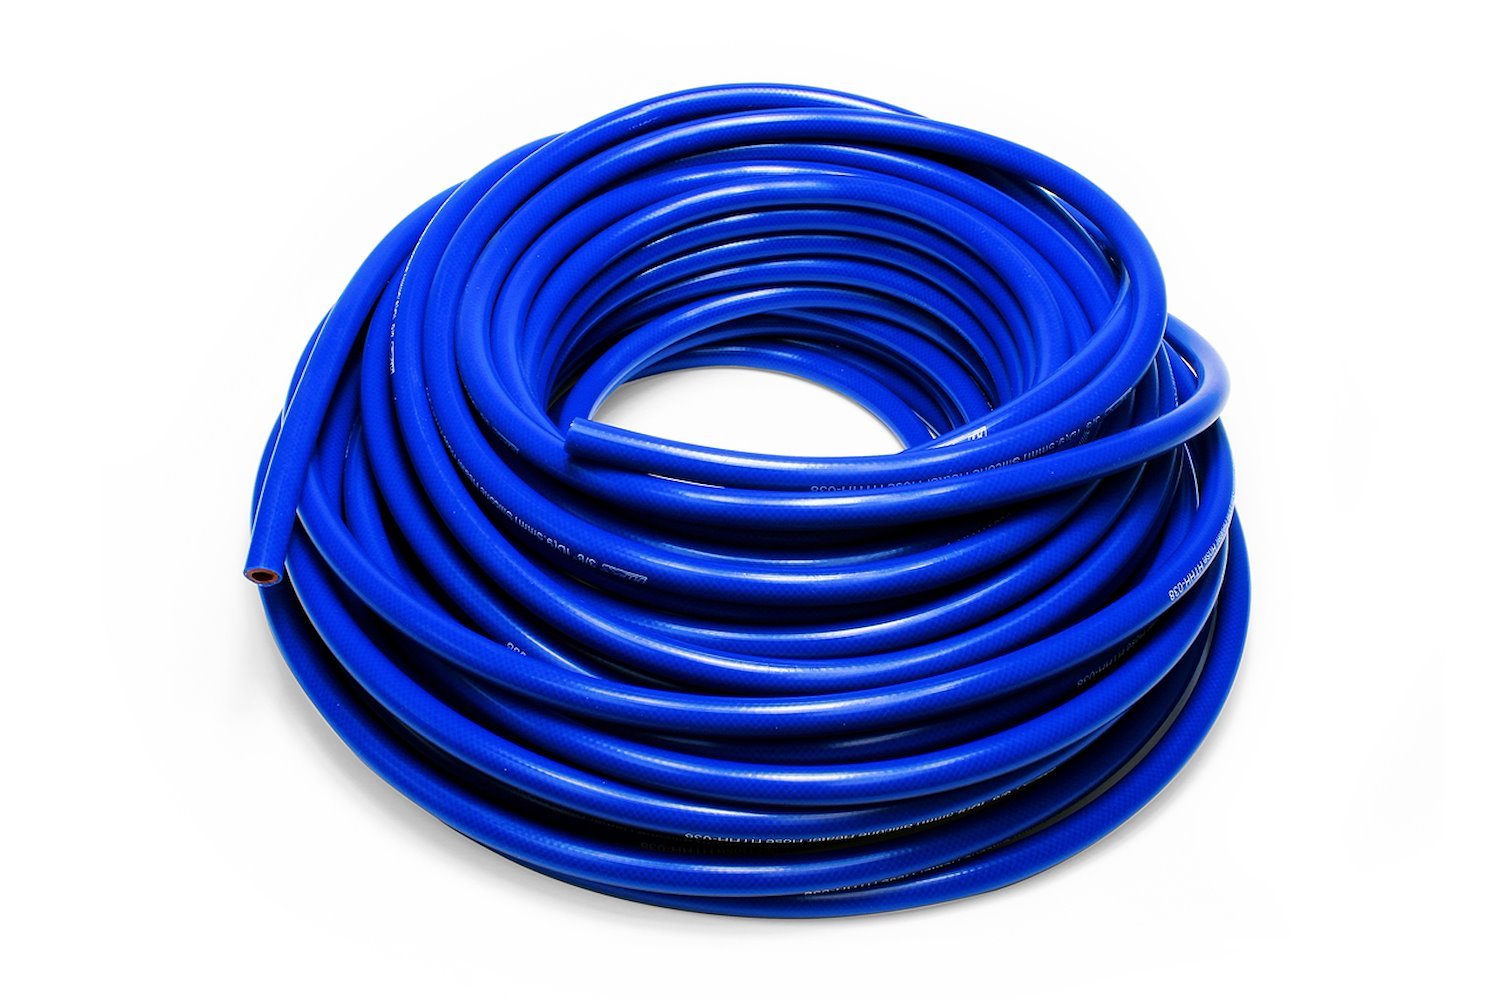 HTHH-100-BLUEx100 Silicone Heater Hose Tubing, High-Temp 1-Ply Reinforced, 1 in. ID, 100 ft. Roll, Blue